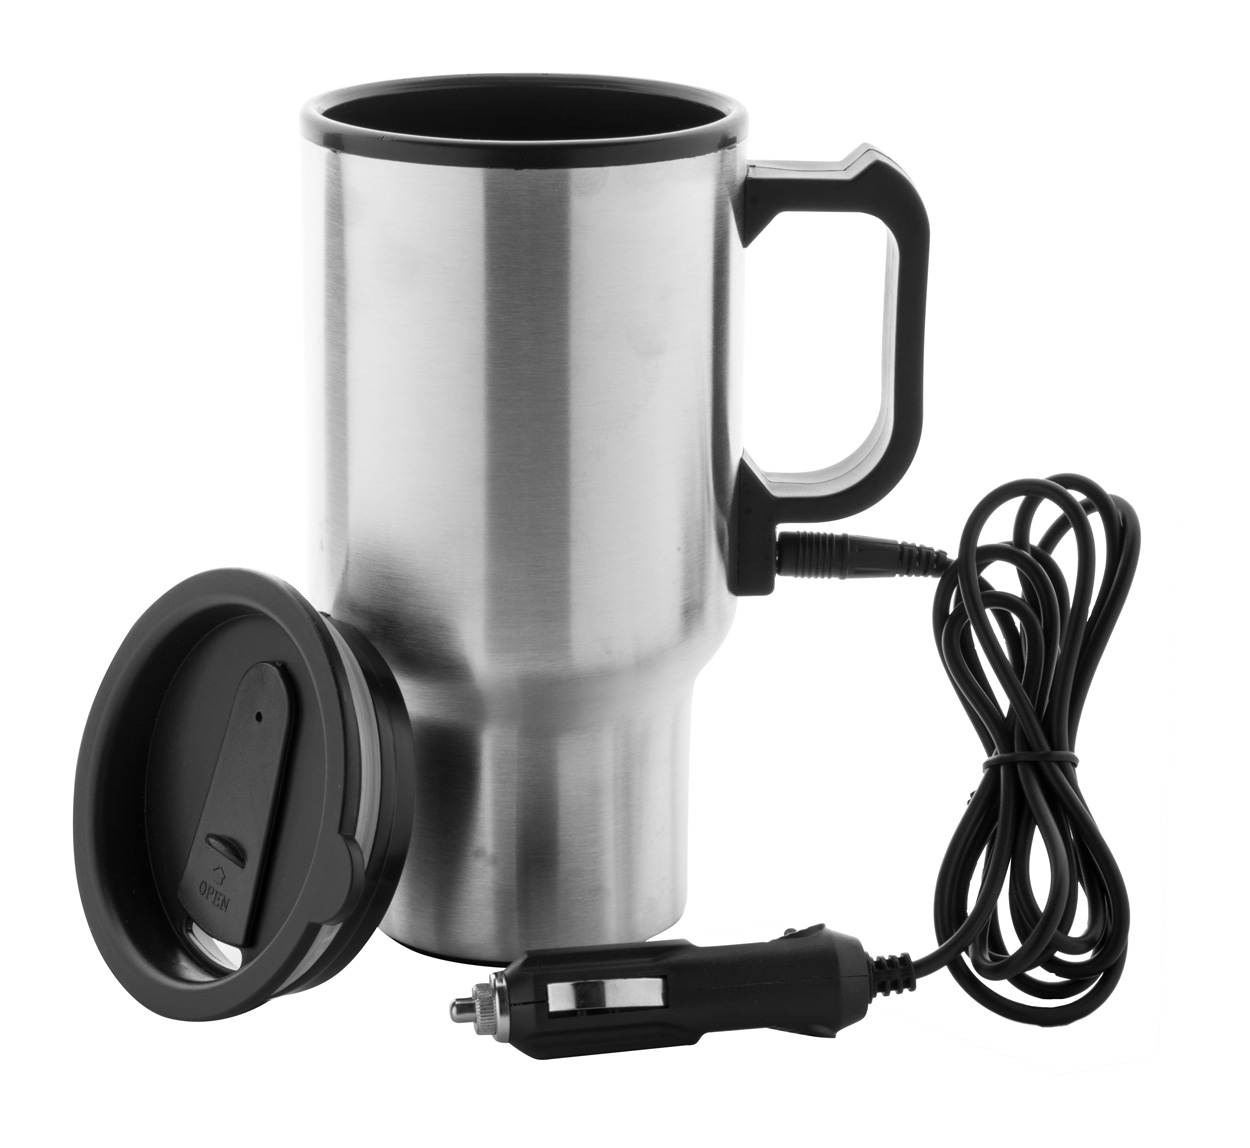 Metal warming thermo mug CABOT with plastic lid, 450 ml - silver